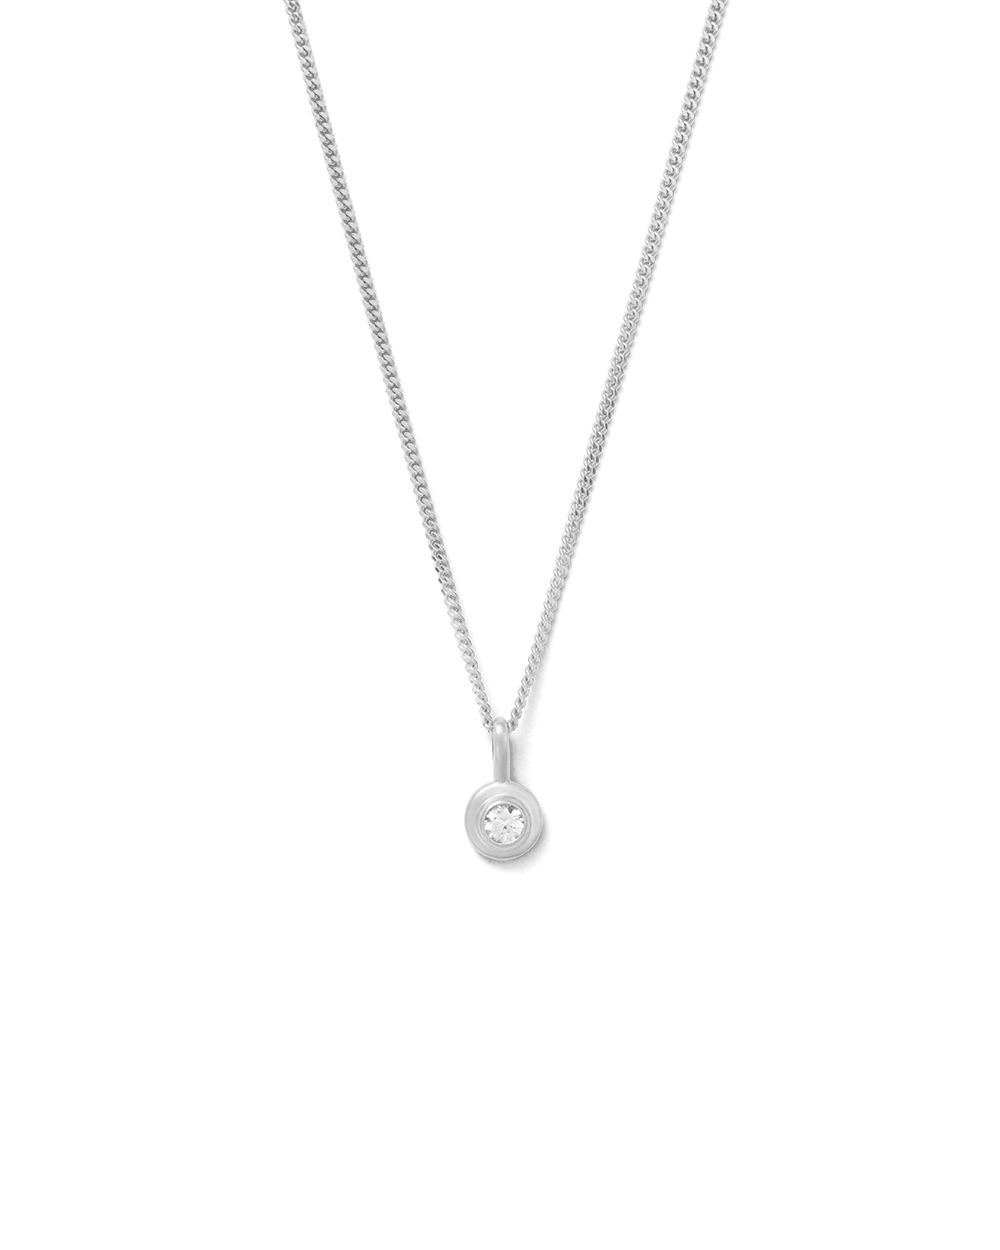 Birthstone Necklace, Engraved, 925 Sterling Silver Heart Necklace| Charming  Engraving